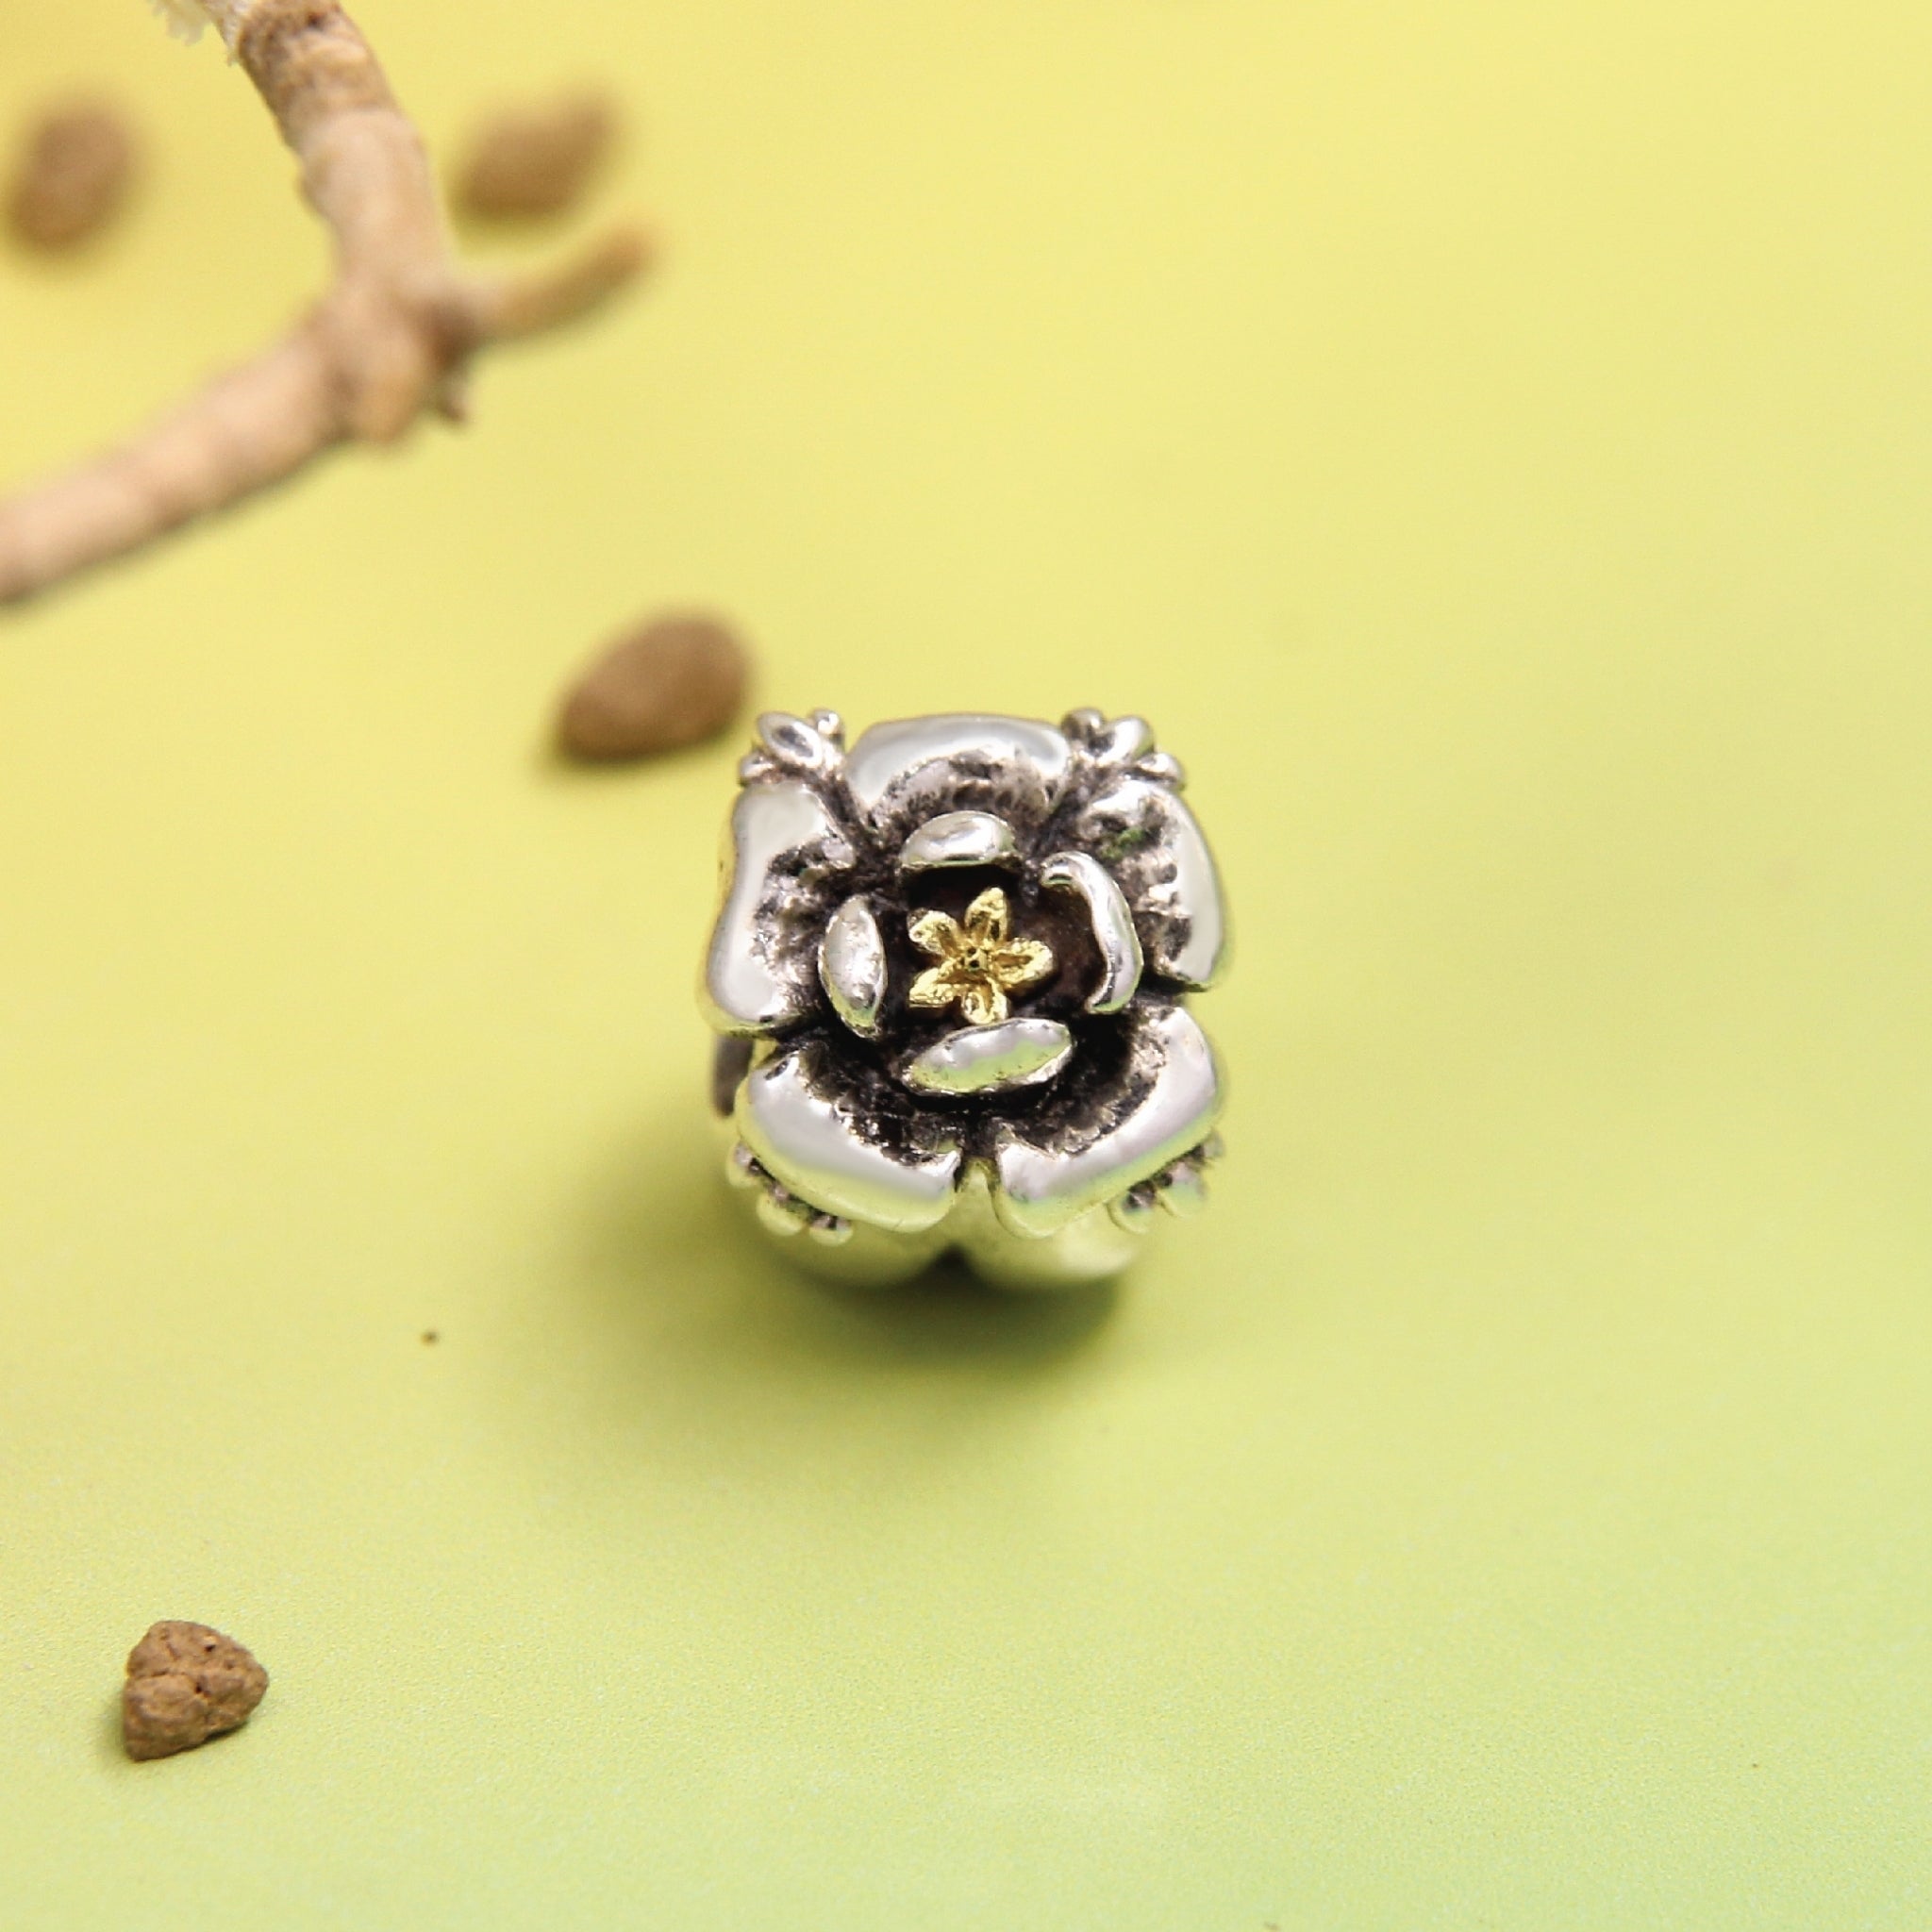 Elf Blossom Bead with 9k Gold Flower